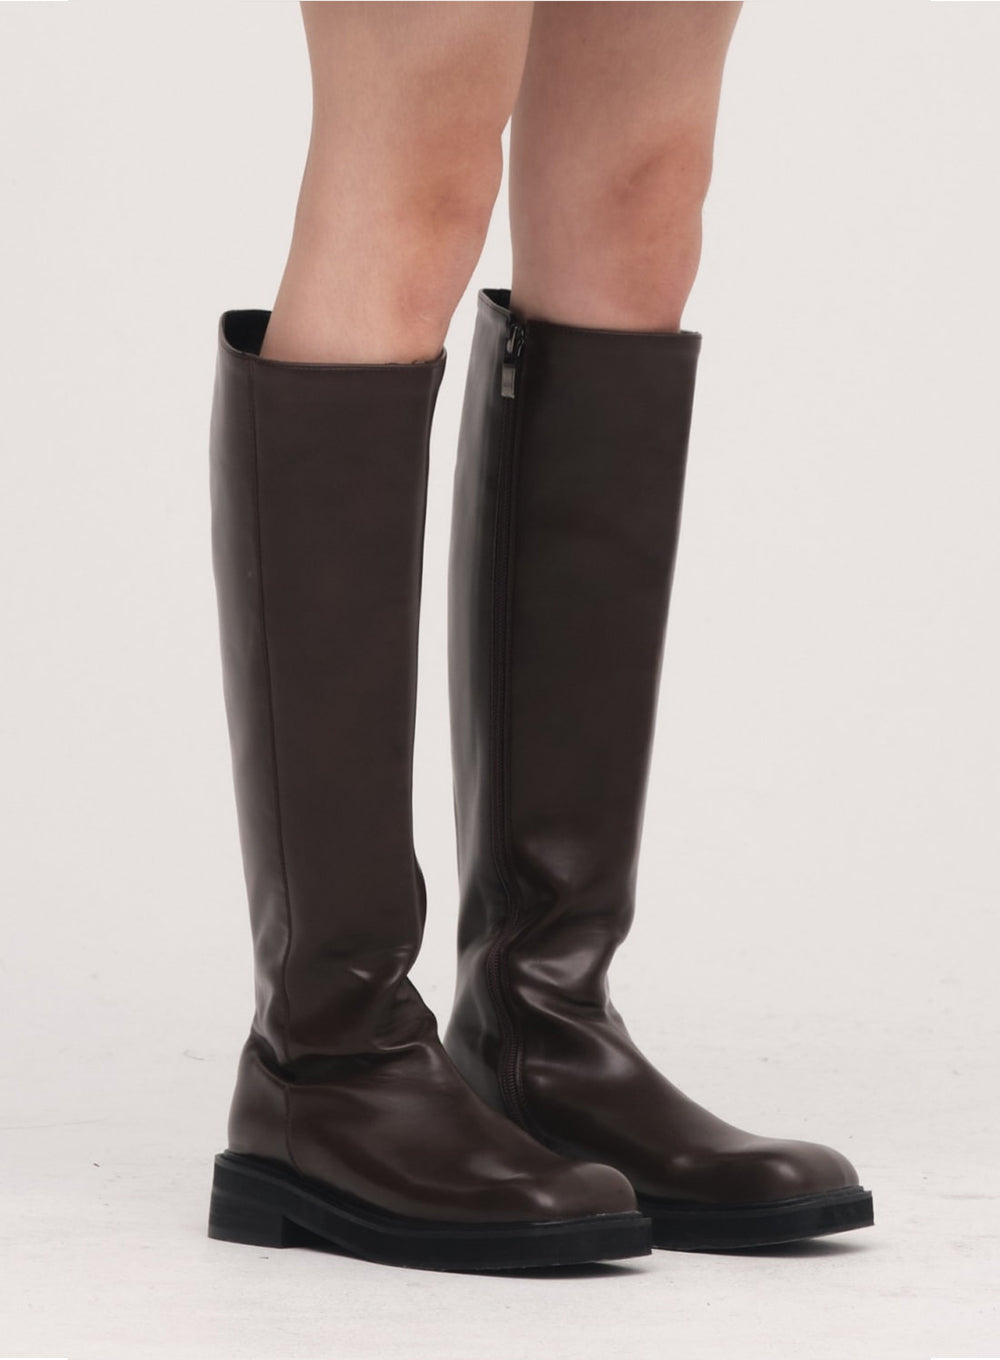 Long Boots #1029S5